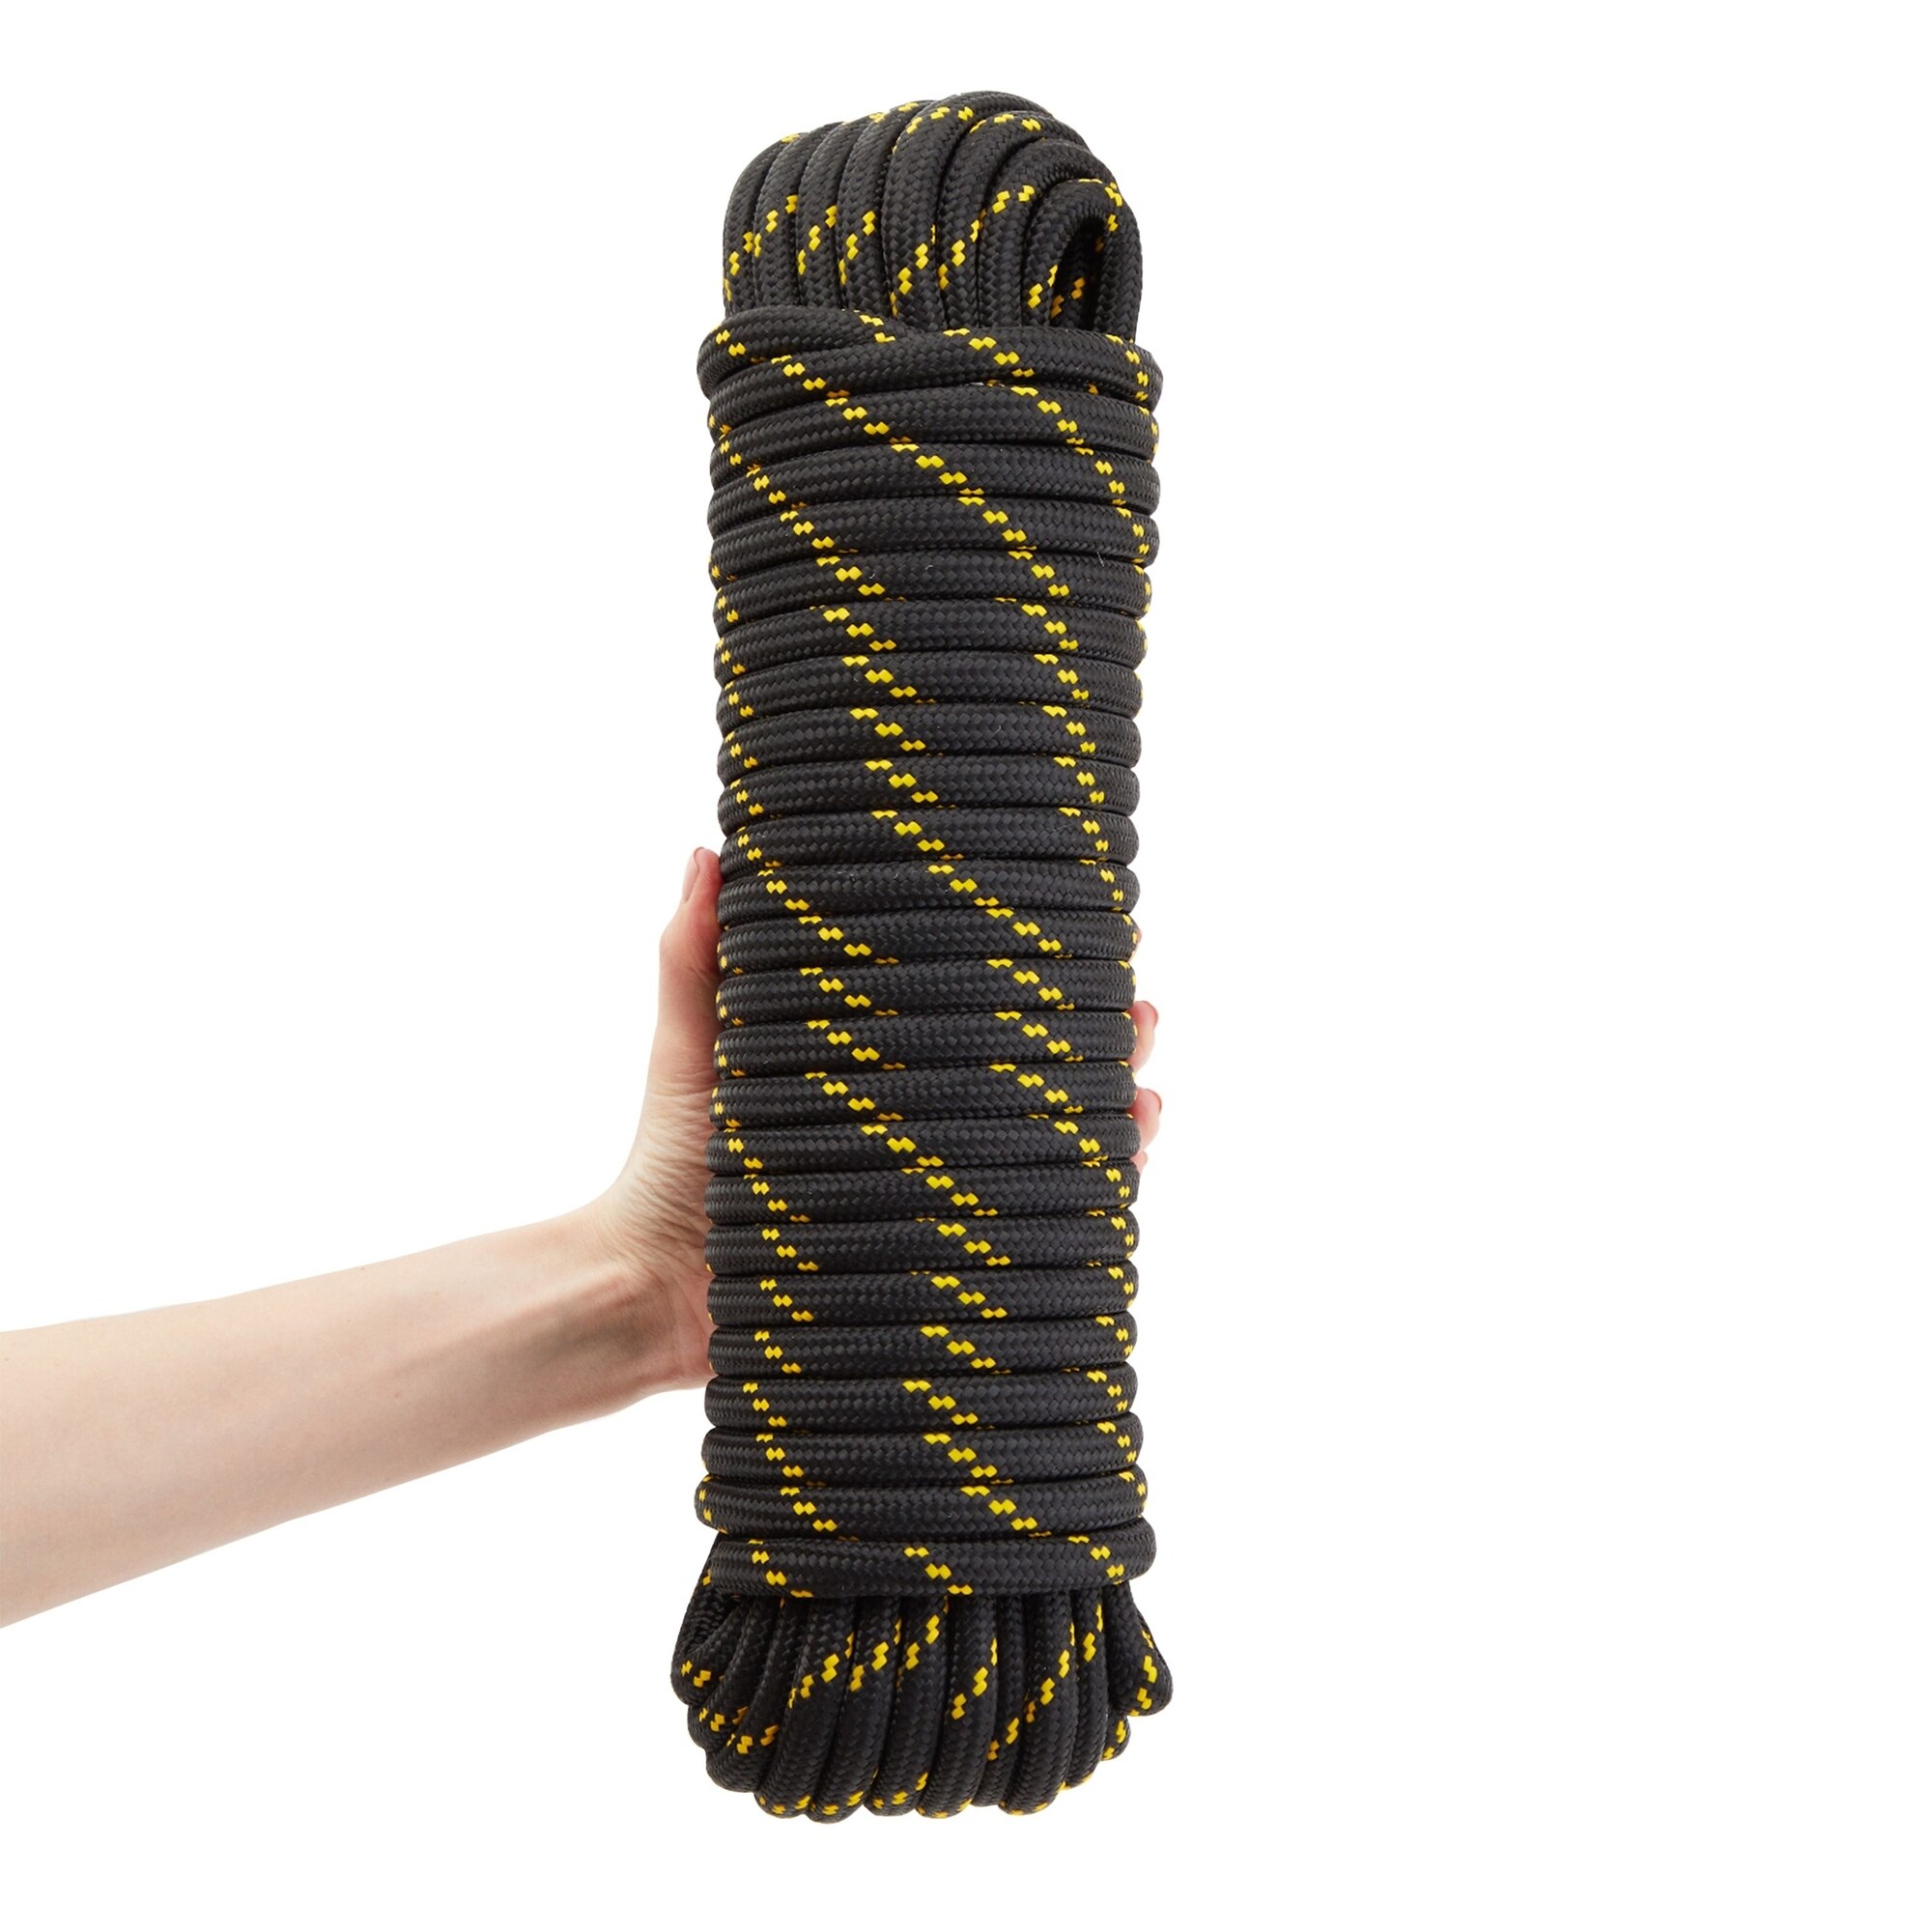 1/2 Inch Braided Rope, 100 Ft Tie Down Utility Cord for Camping, Boat  Docks, Trailers, Survival Skills, Black/Yellow - Bed Bath & Beyond -  38212544